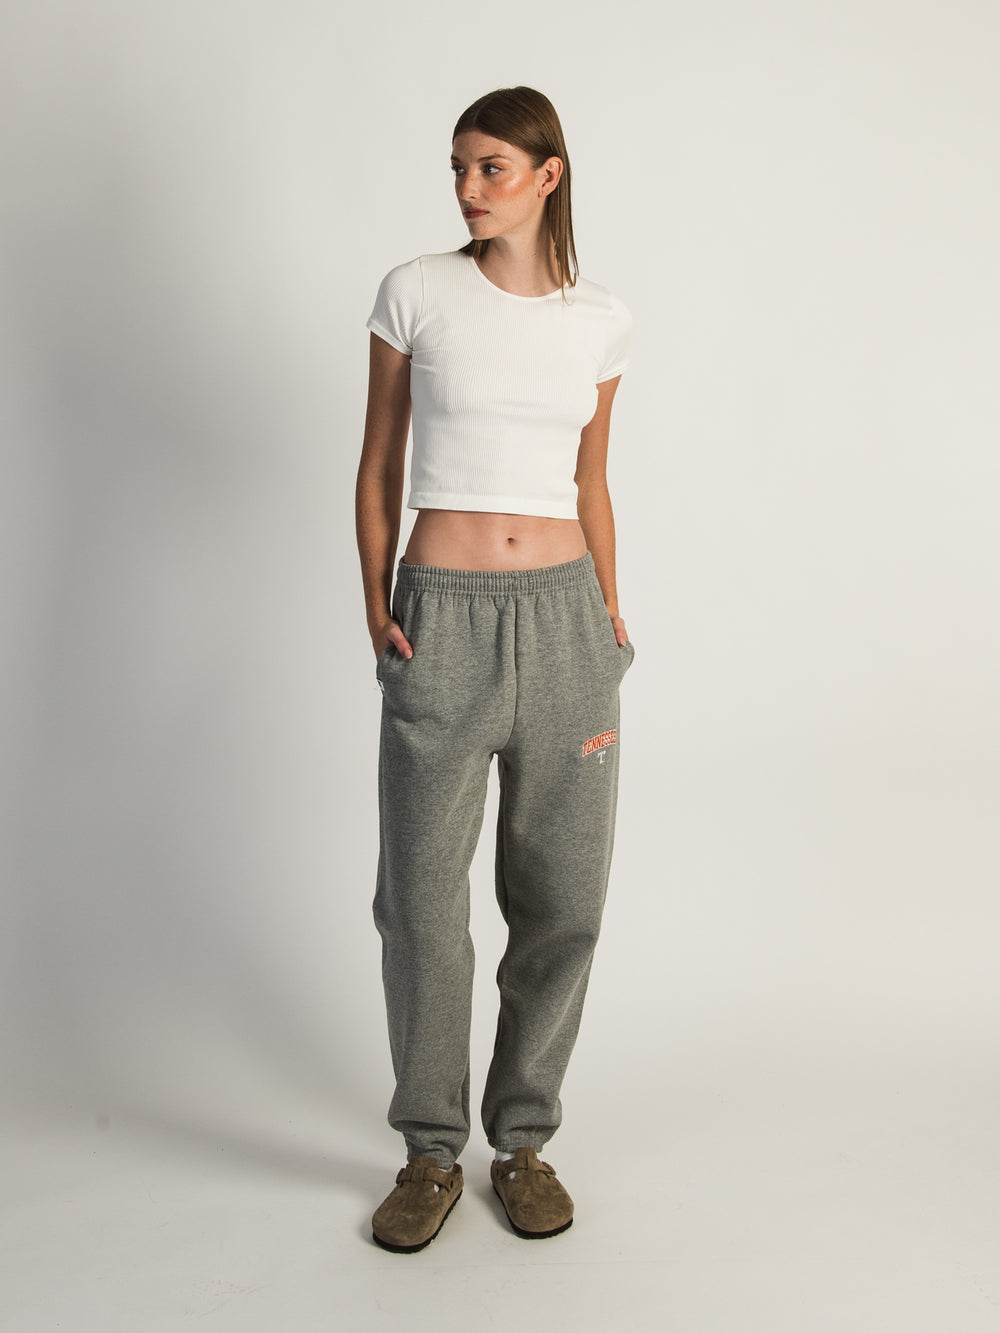 RUSSELL TENNESSEE SWEATPANTS